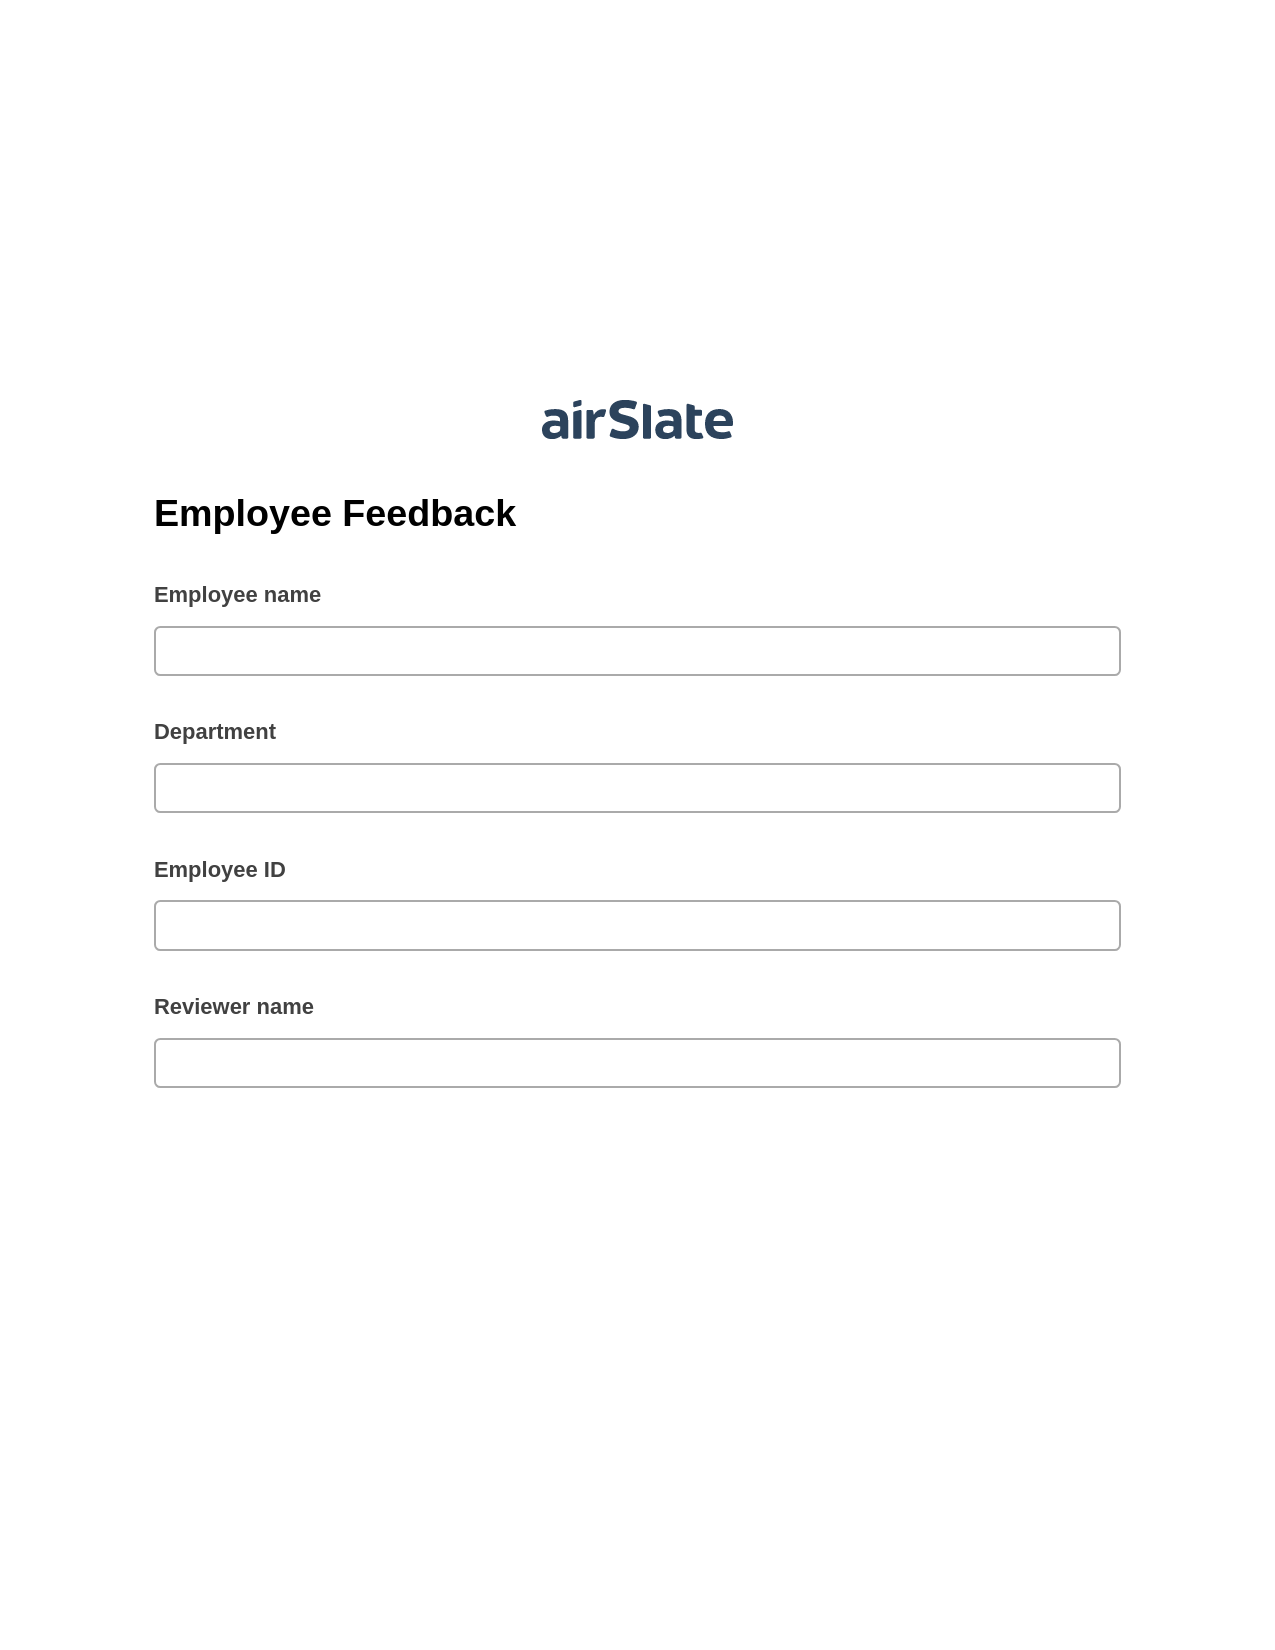 Employee Feedback Pre-fill from Google Sheet Dropdown Options Bot, Google Calendar Bot, Export to Formstack Documents Bot